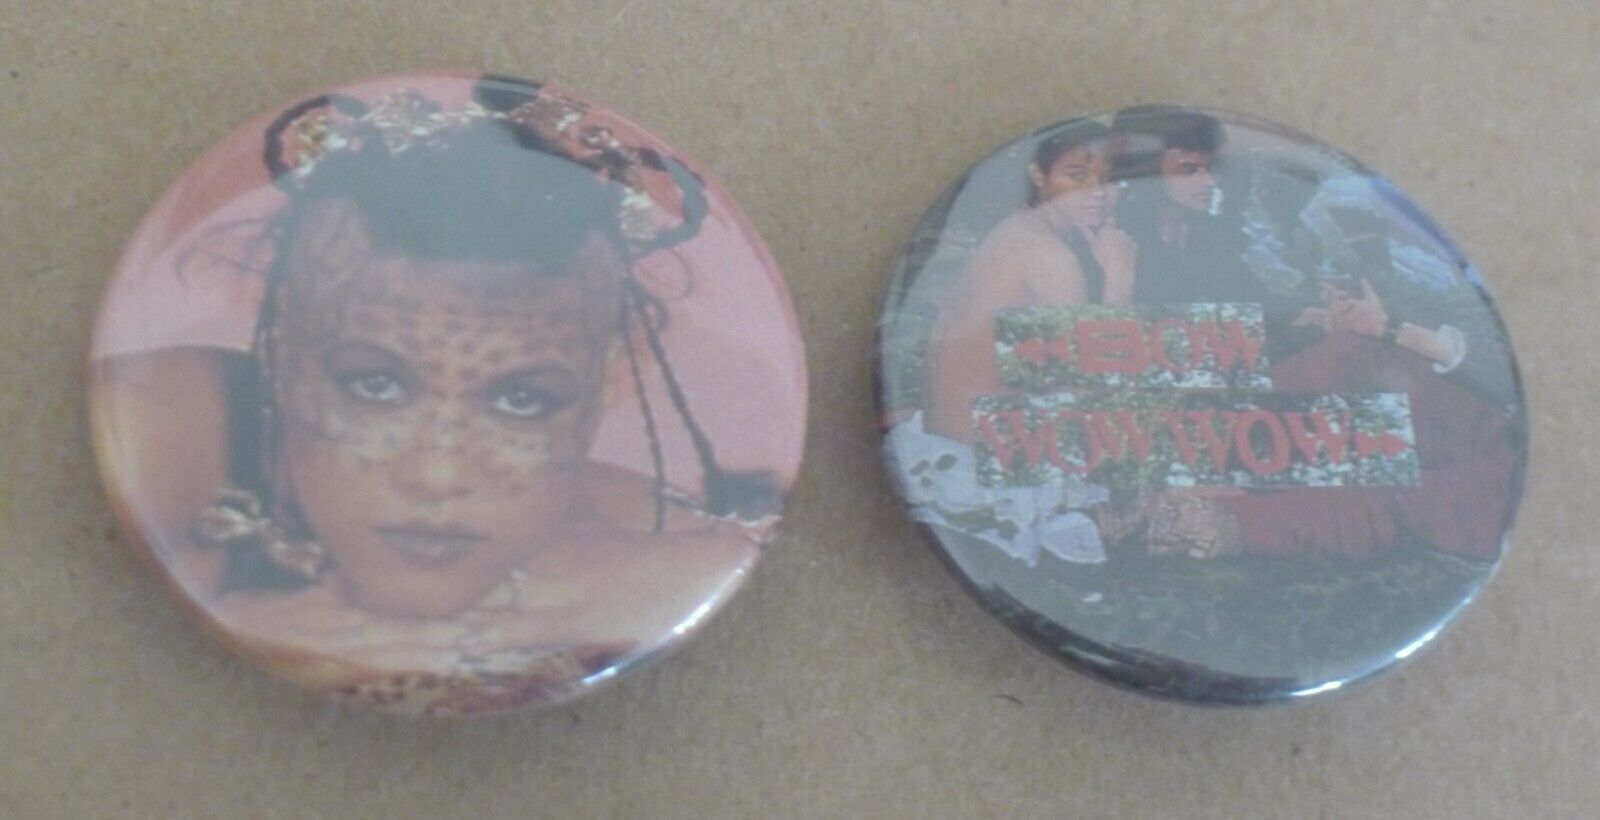 BOW WOW WOW band (2) pinback button SET badge LOT new wave ANNABELLA LWIN